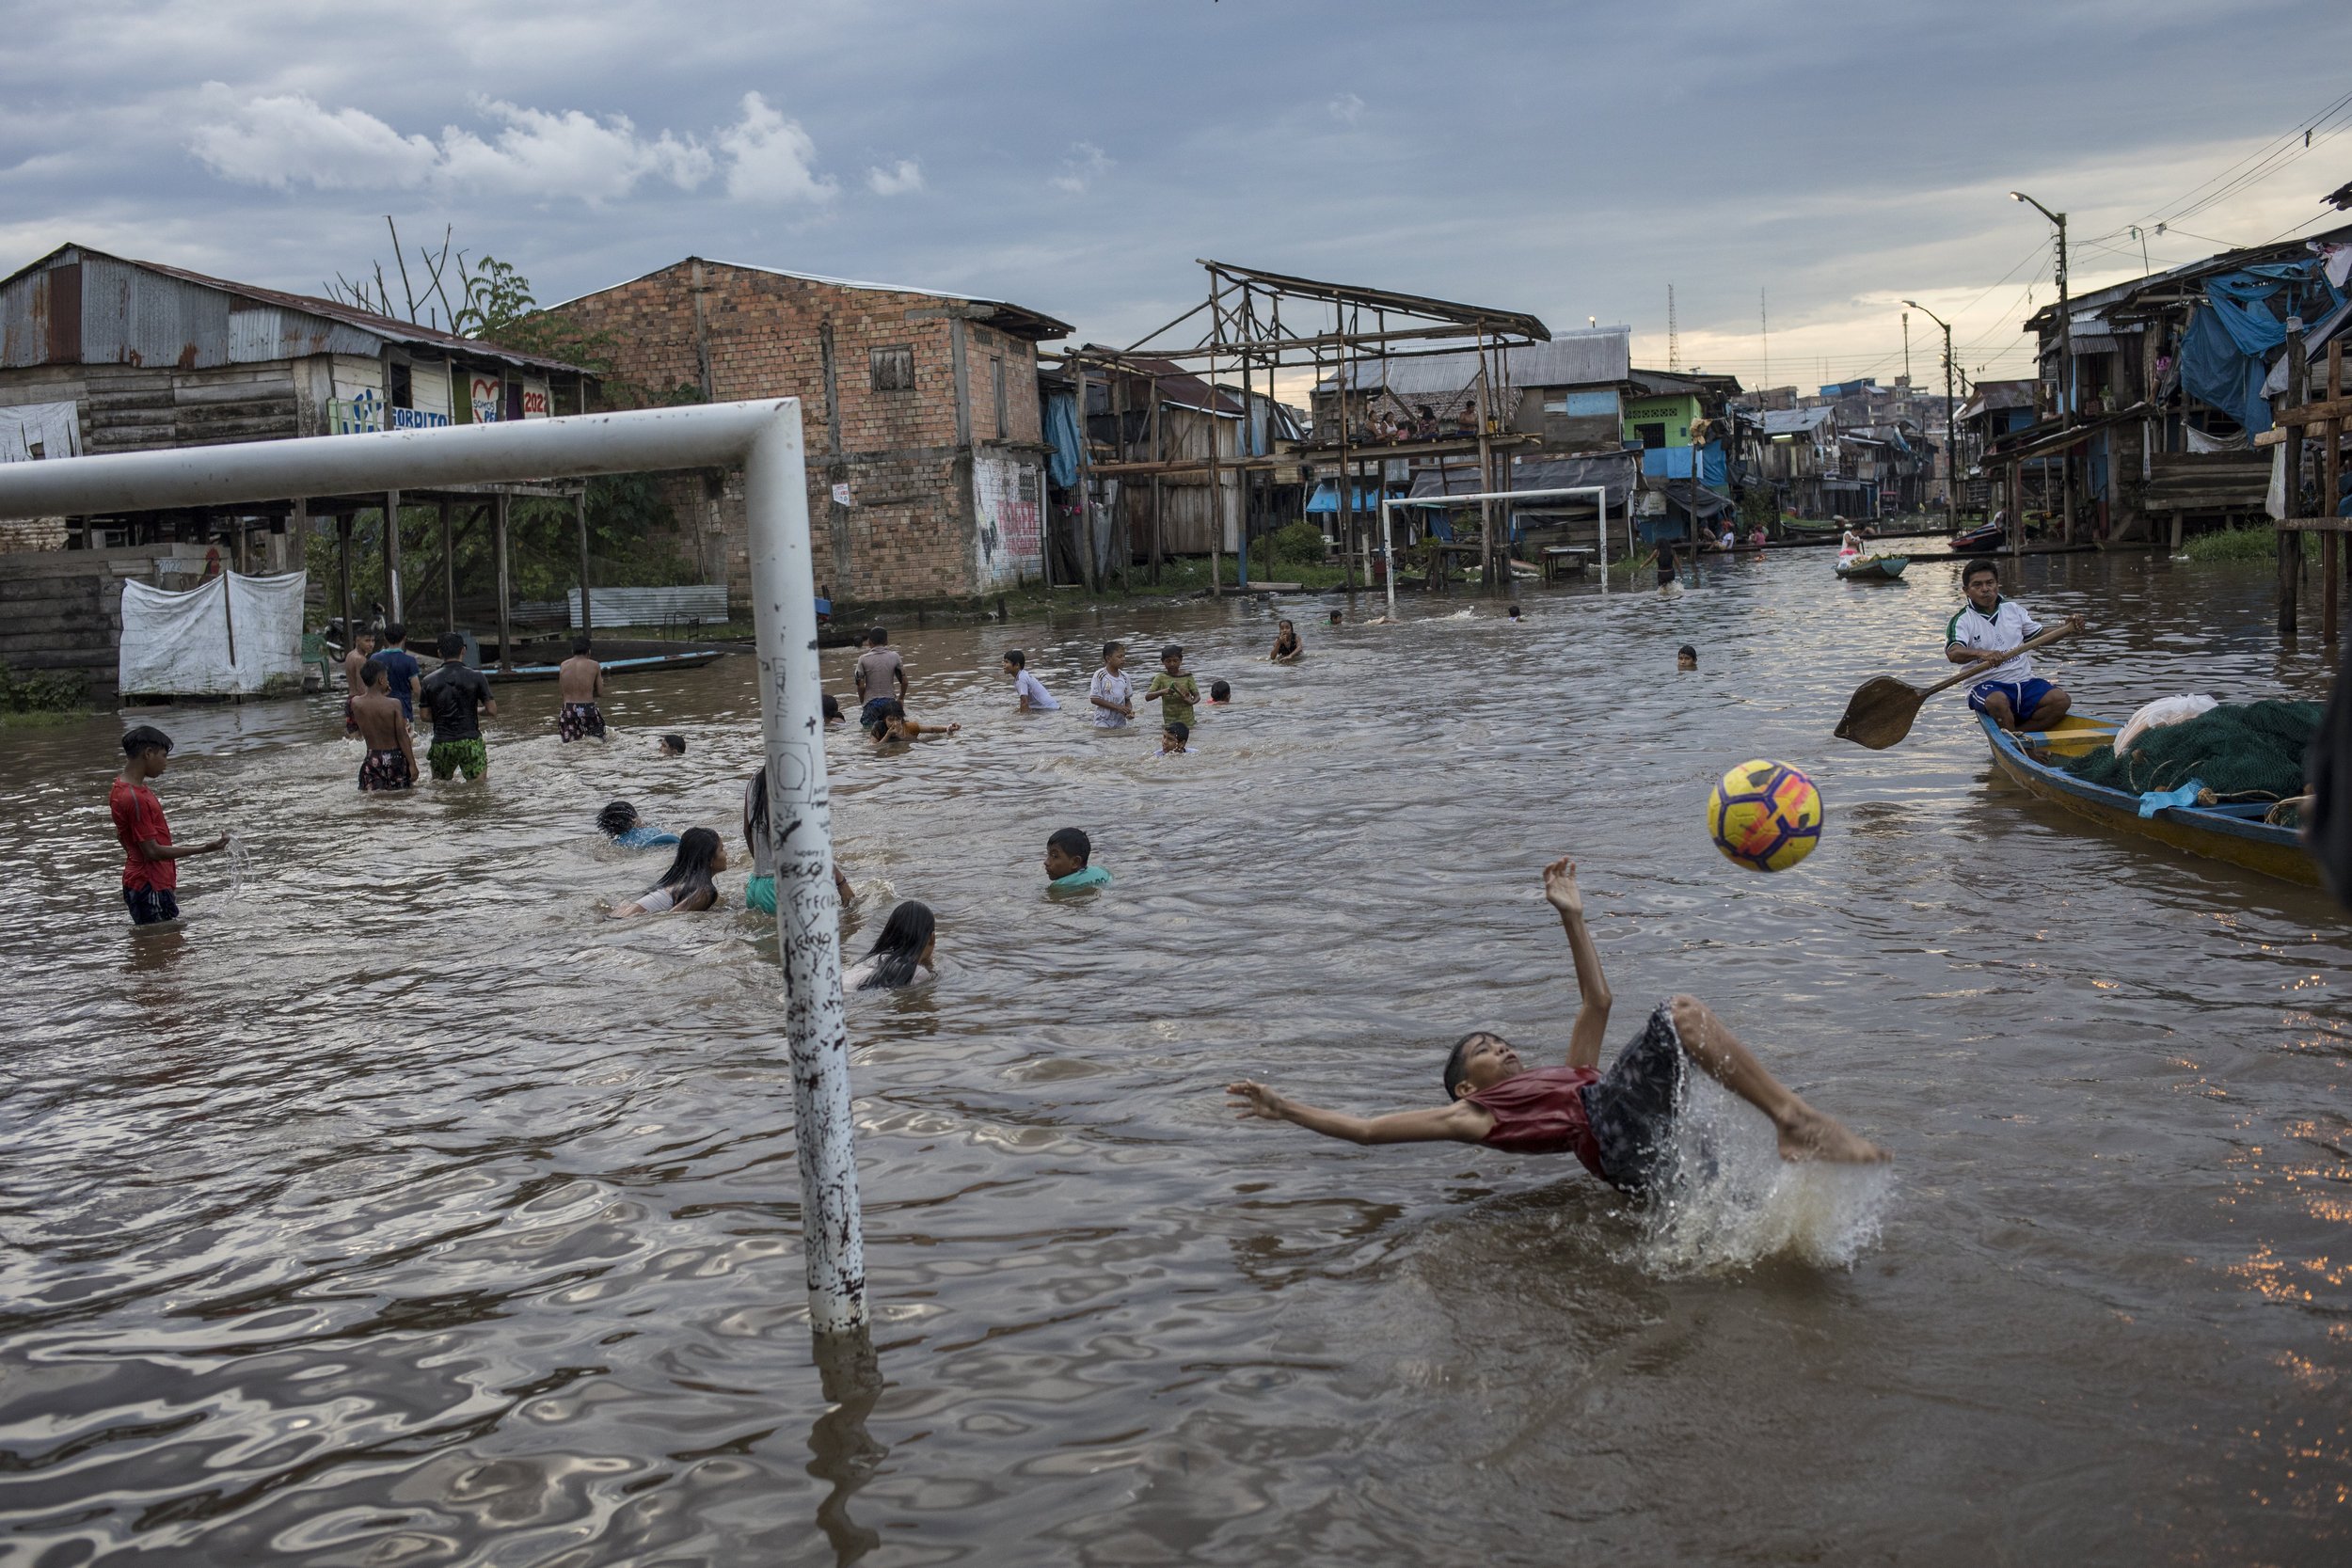  A boy bicycle-kicks a ball in a flooded area of the Belen community in Iquitos, Peru, on March 20, 2021. (AP Photo/Rodrigo Abd) 